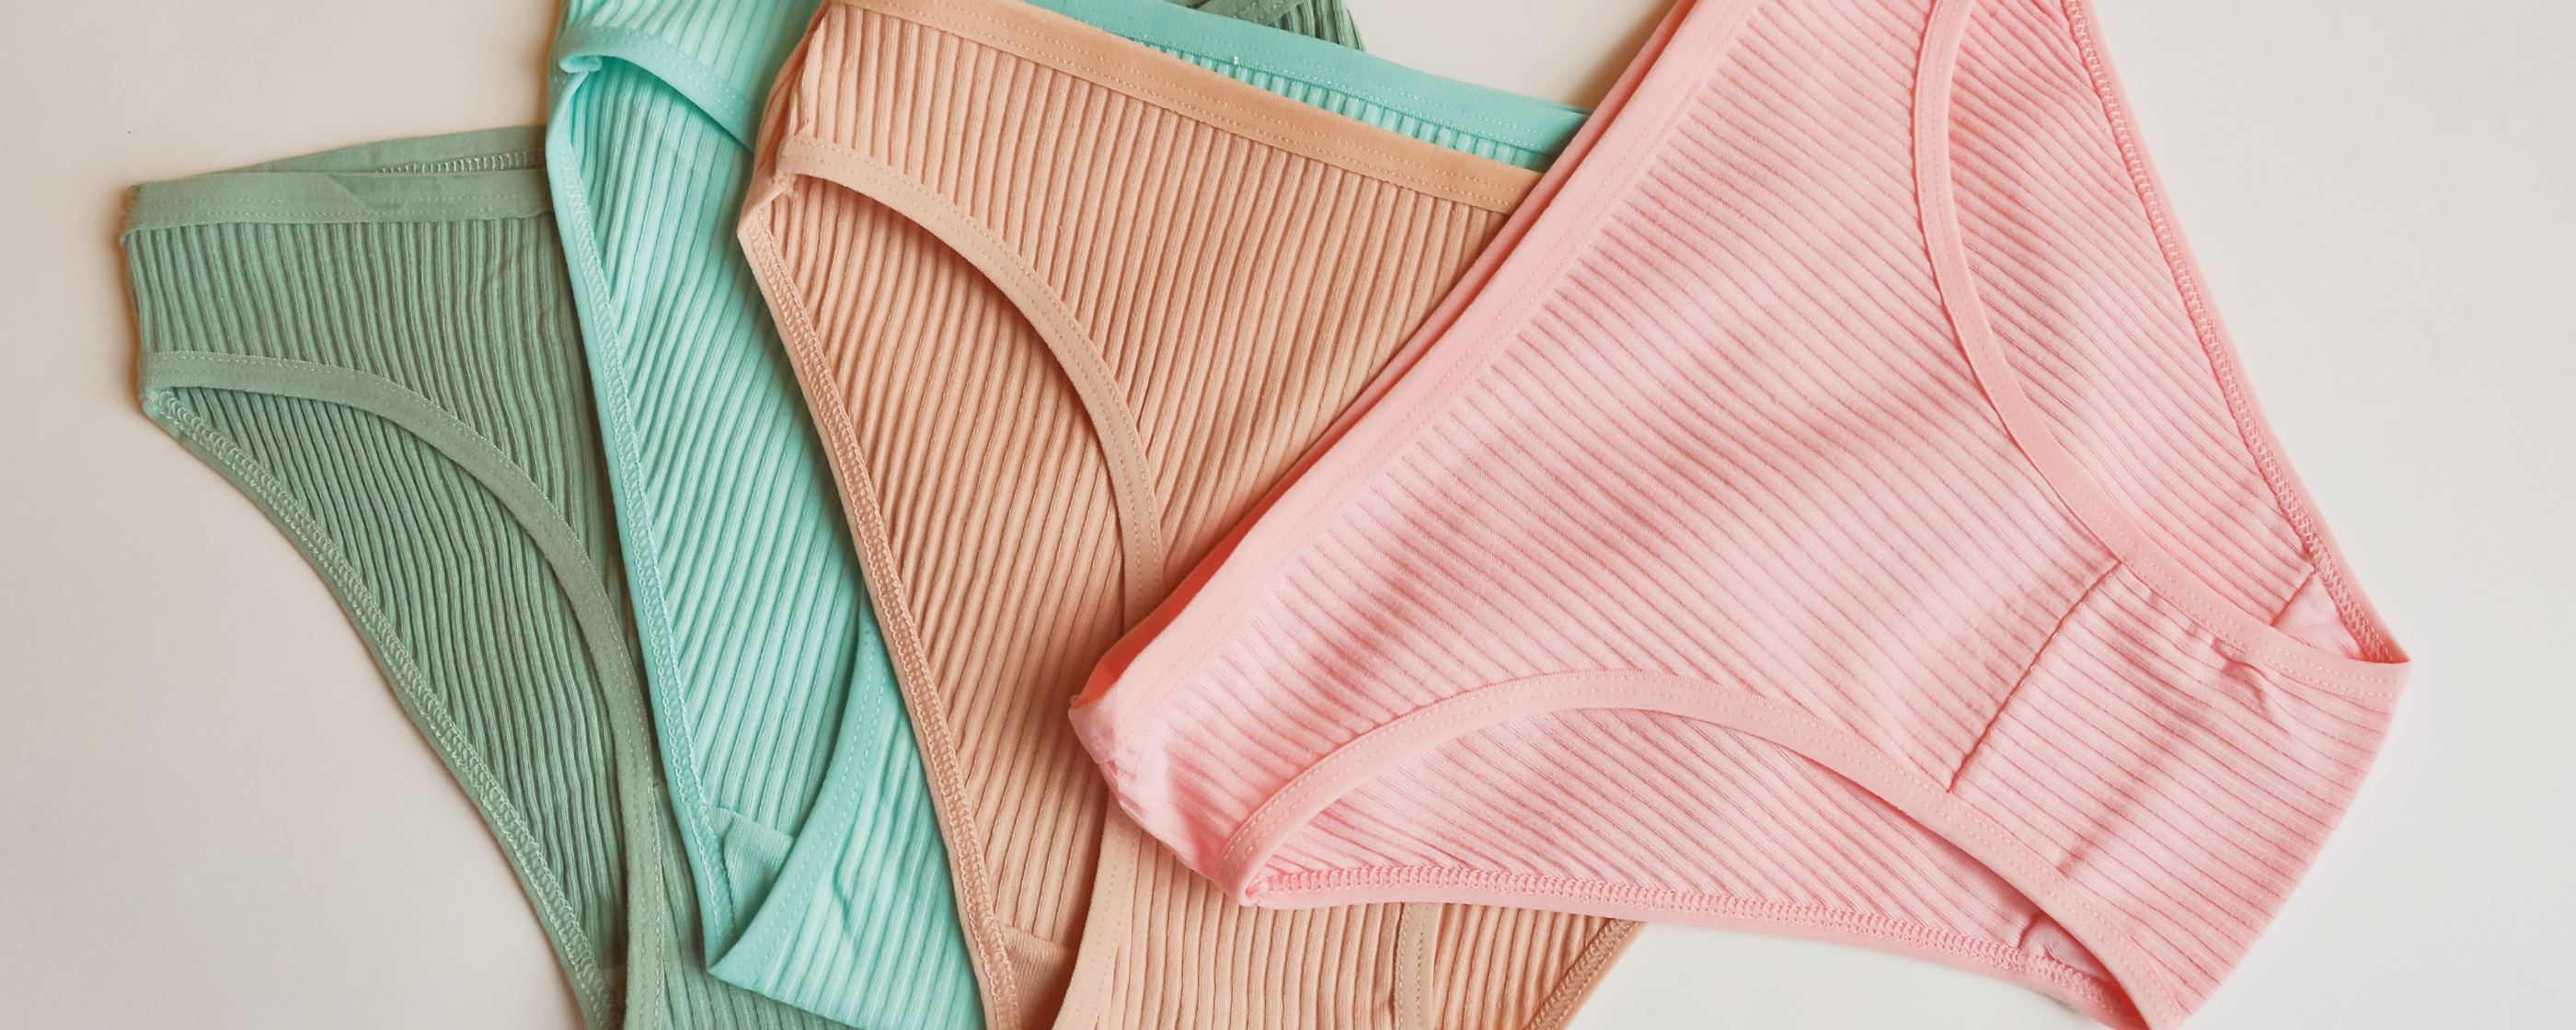 Four pairs of women's underwear in varying colors.